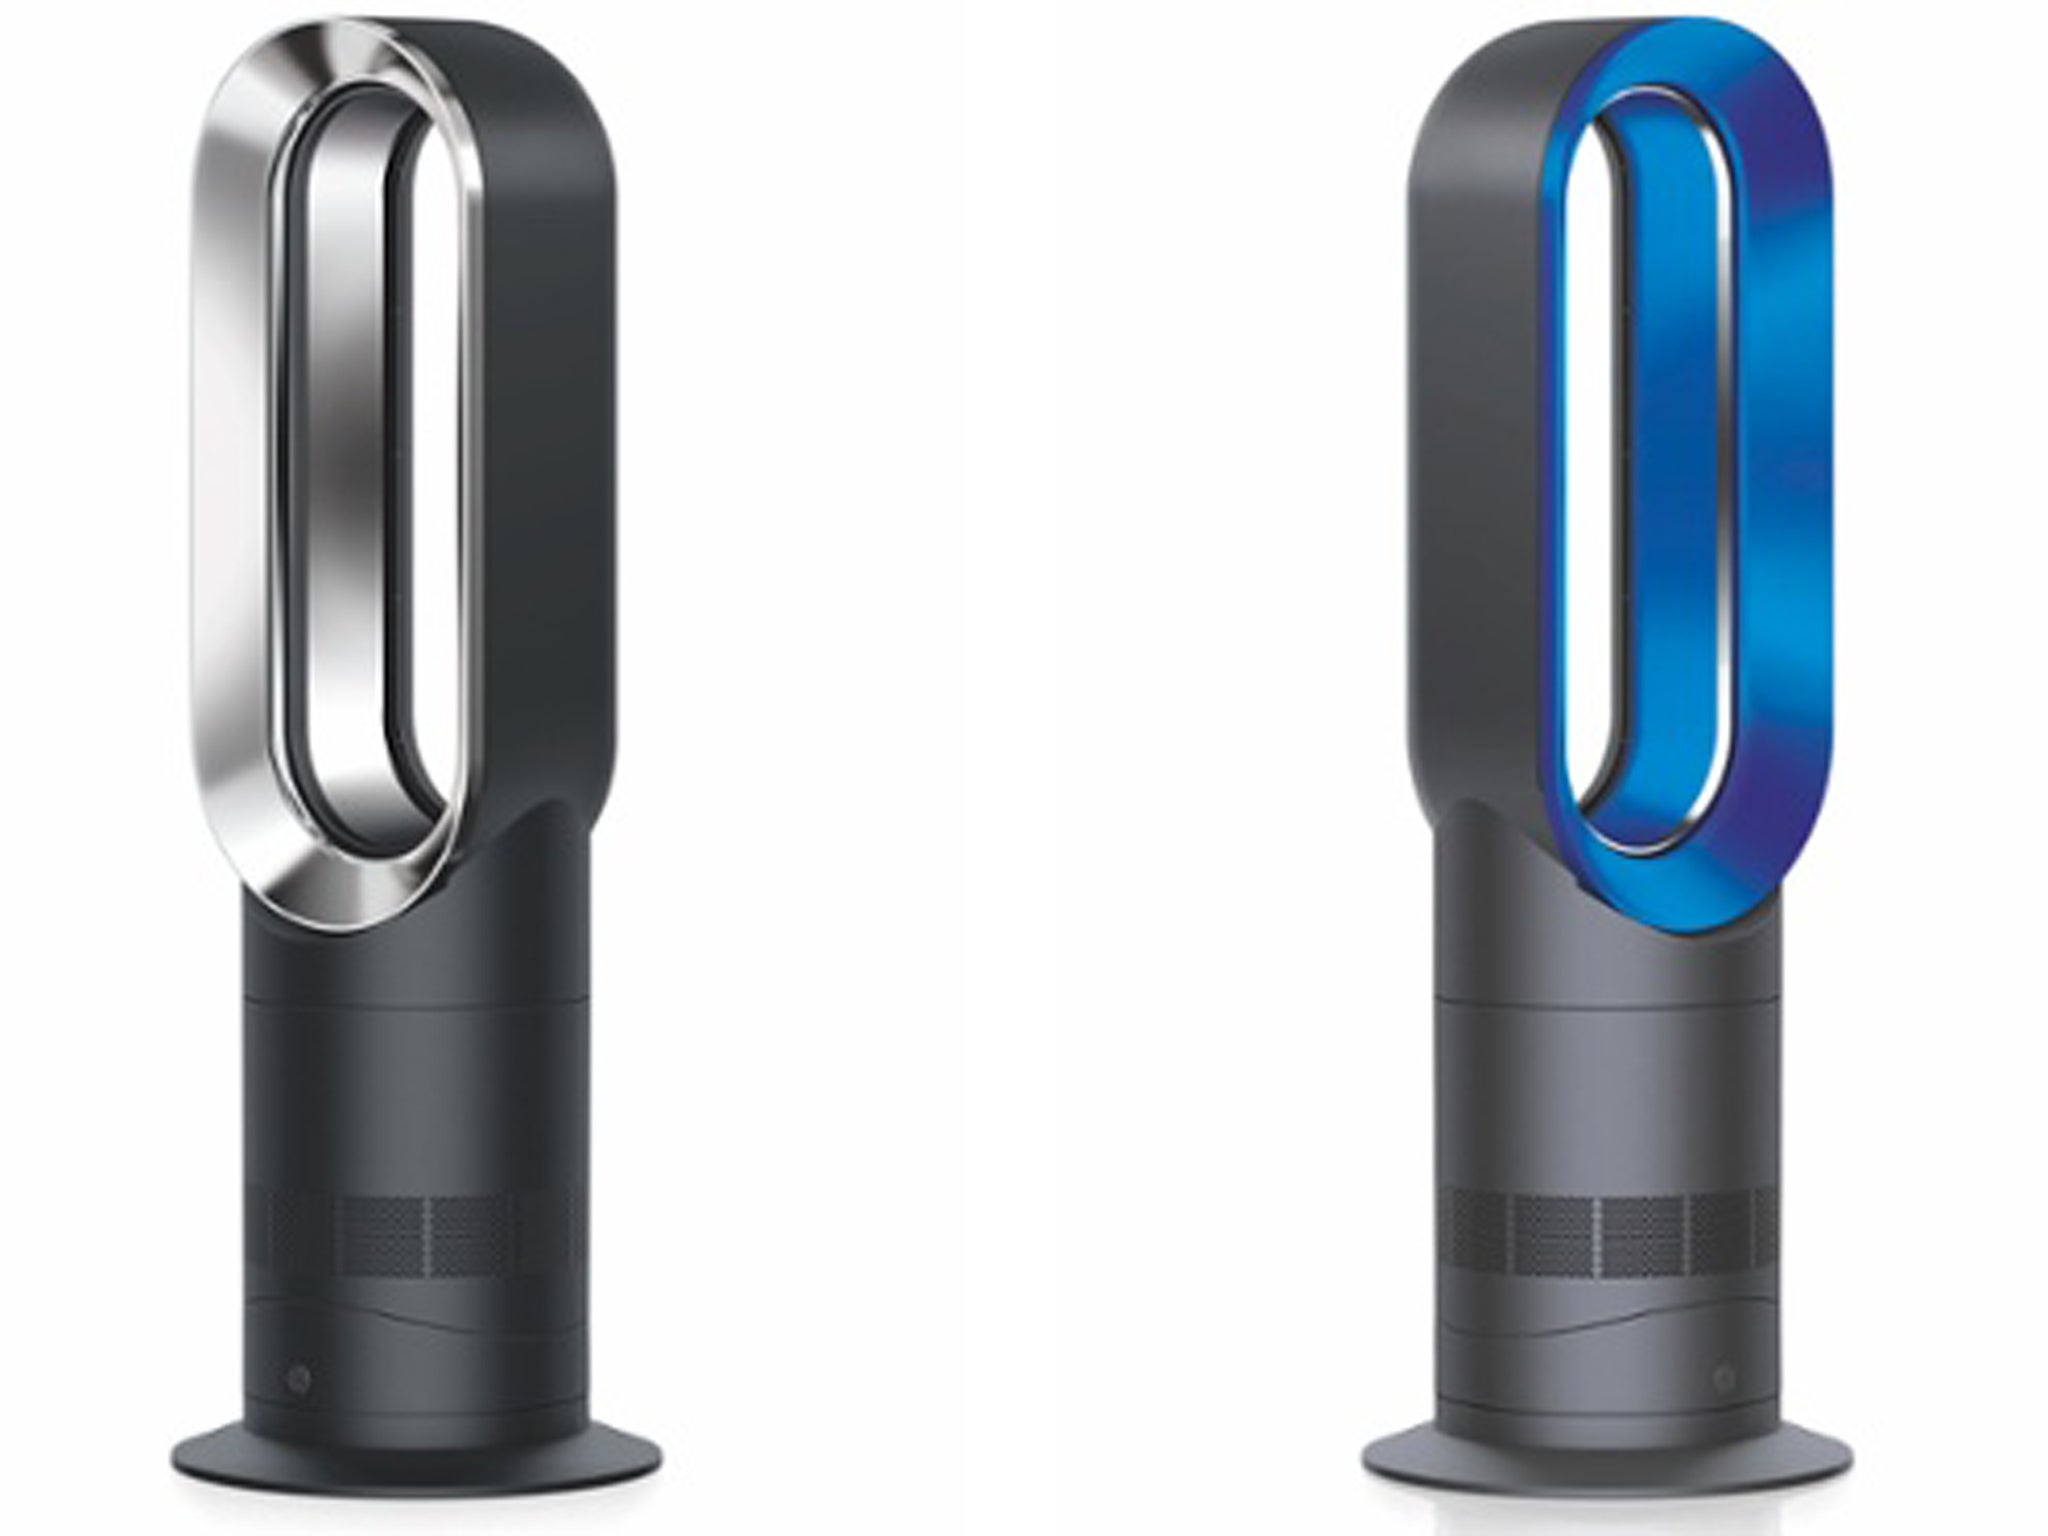 Dyson Hot + Cool AM09 review: the smartest heater and fan in the world